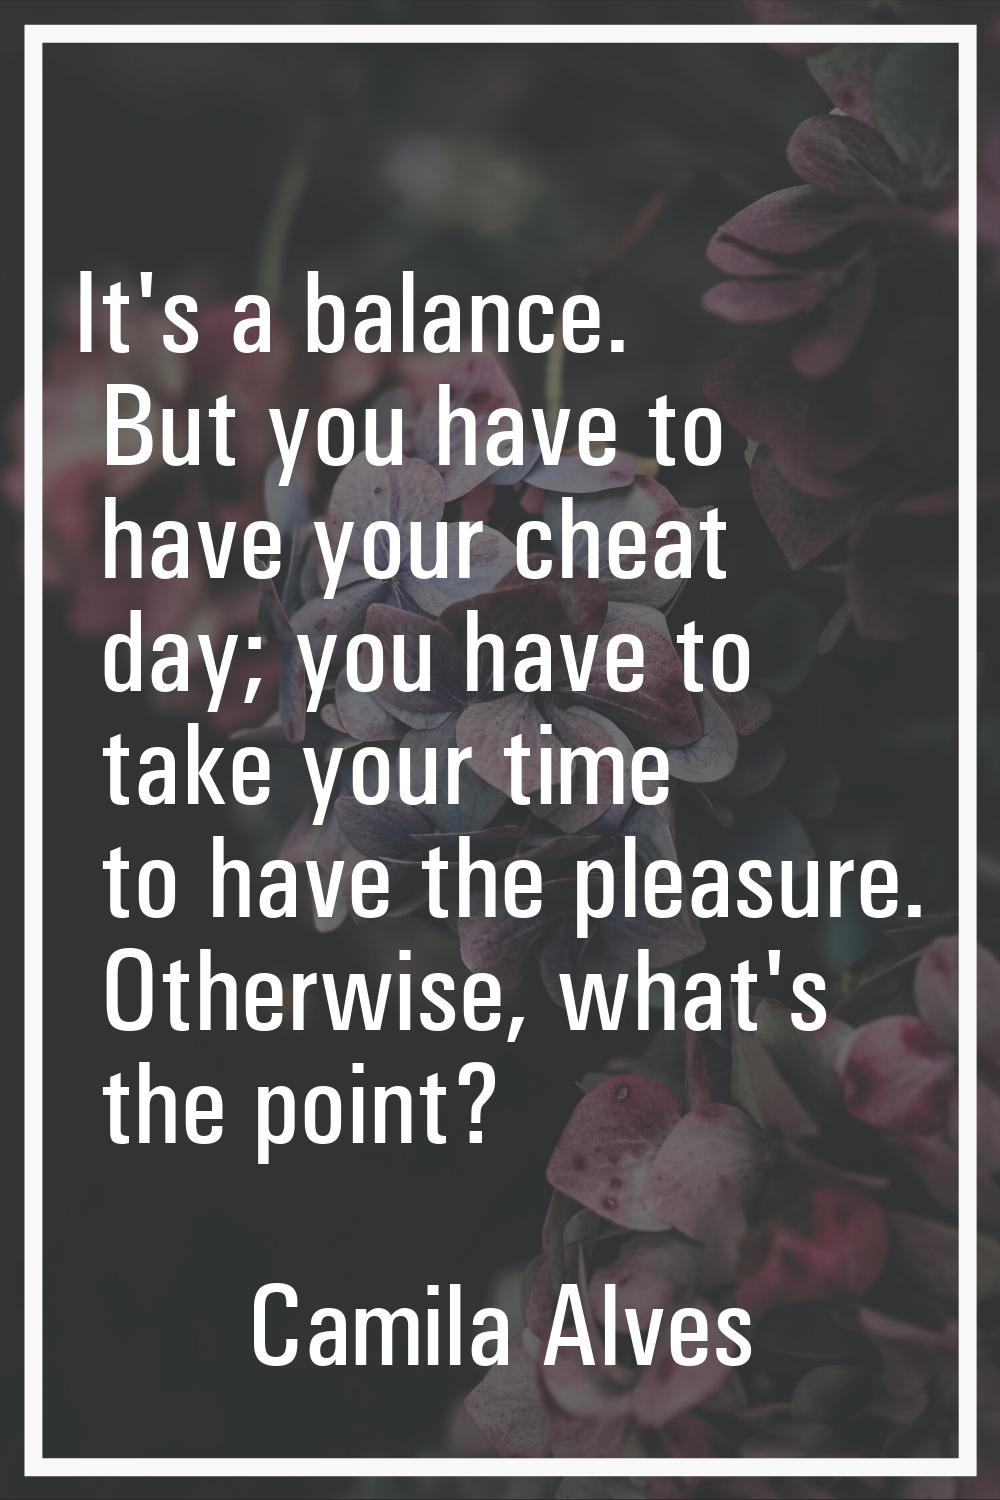 It's a balance. But you have to have your cheat day; you have to take your time to have the pleasur